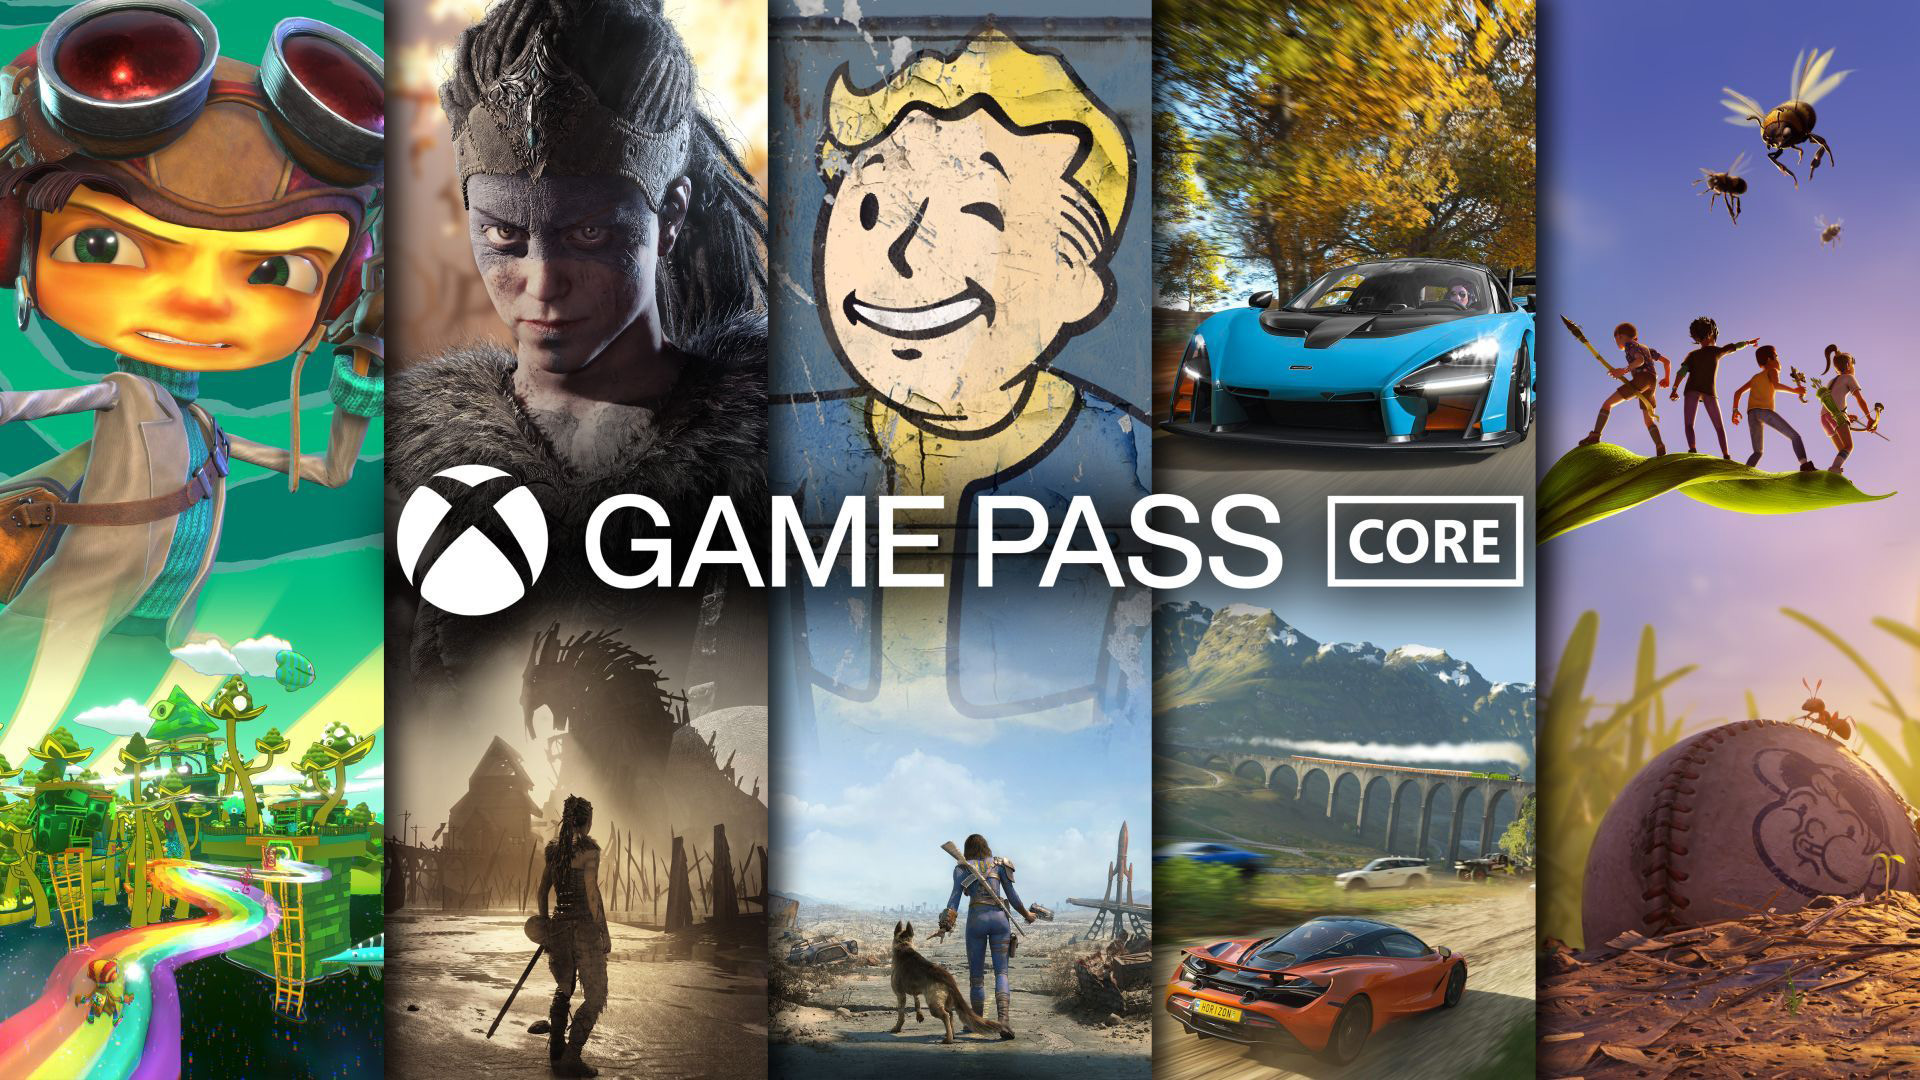 Xbox Game Pass Core is replacing Xbox Live Gold this September